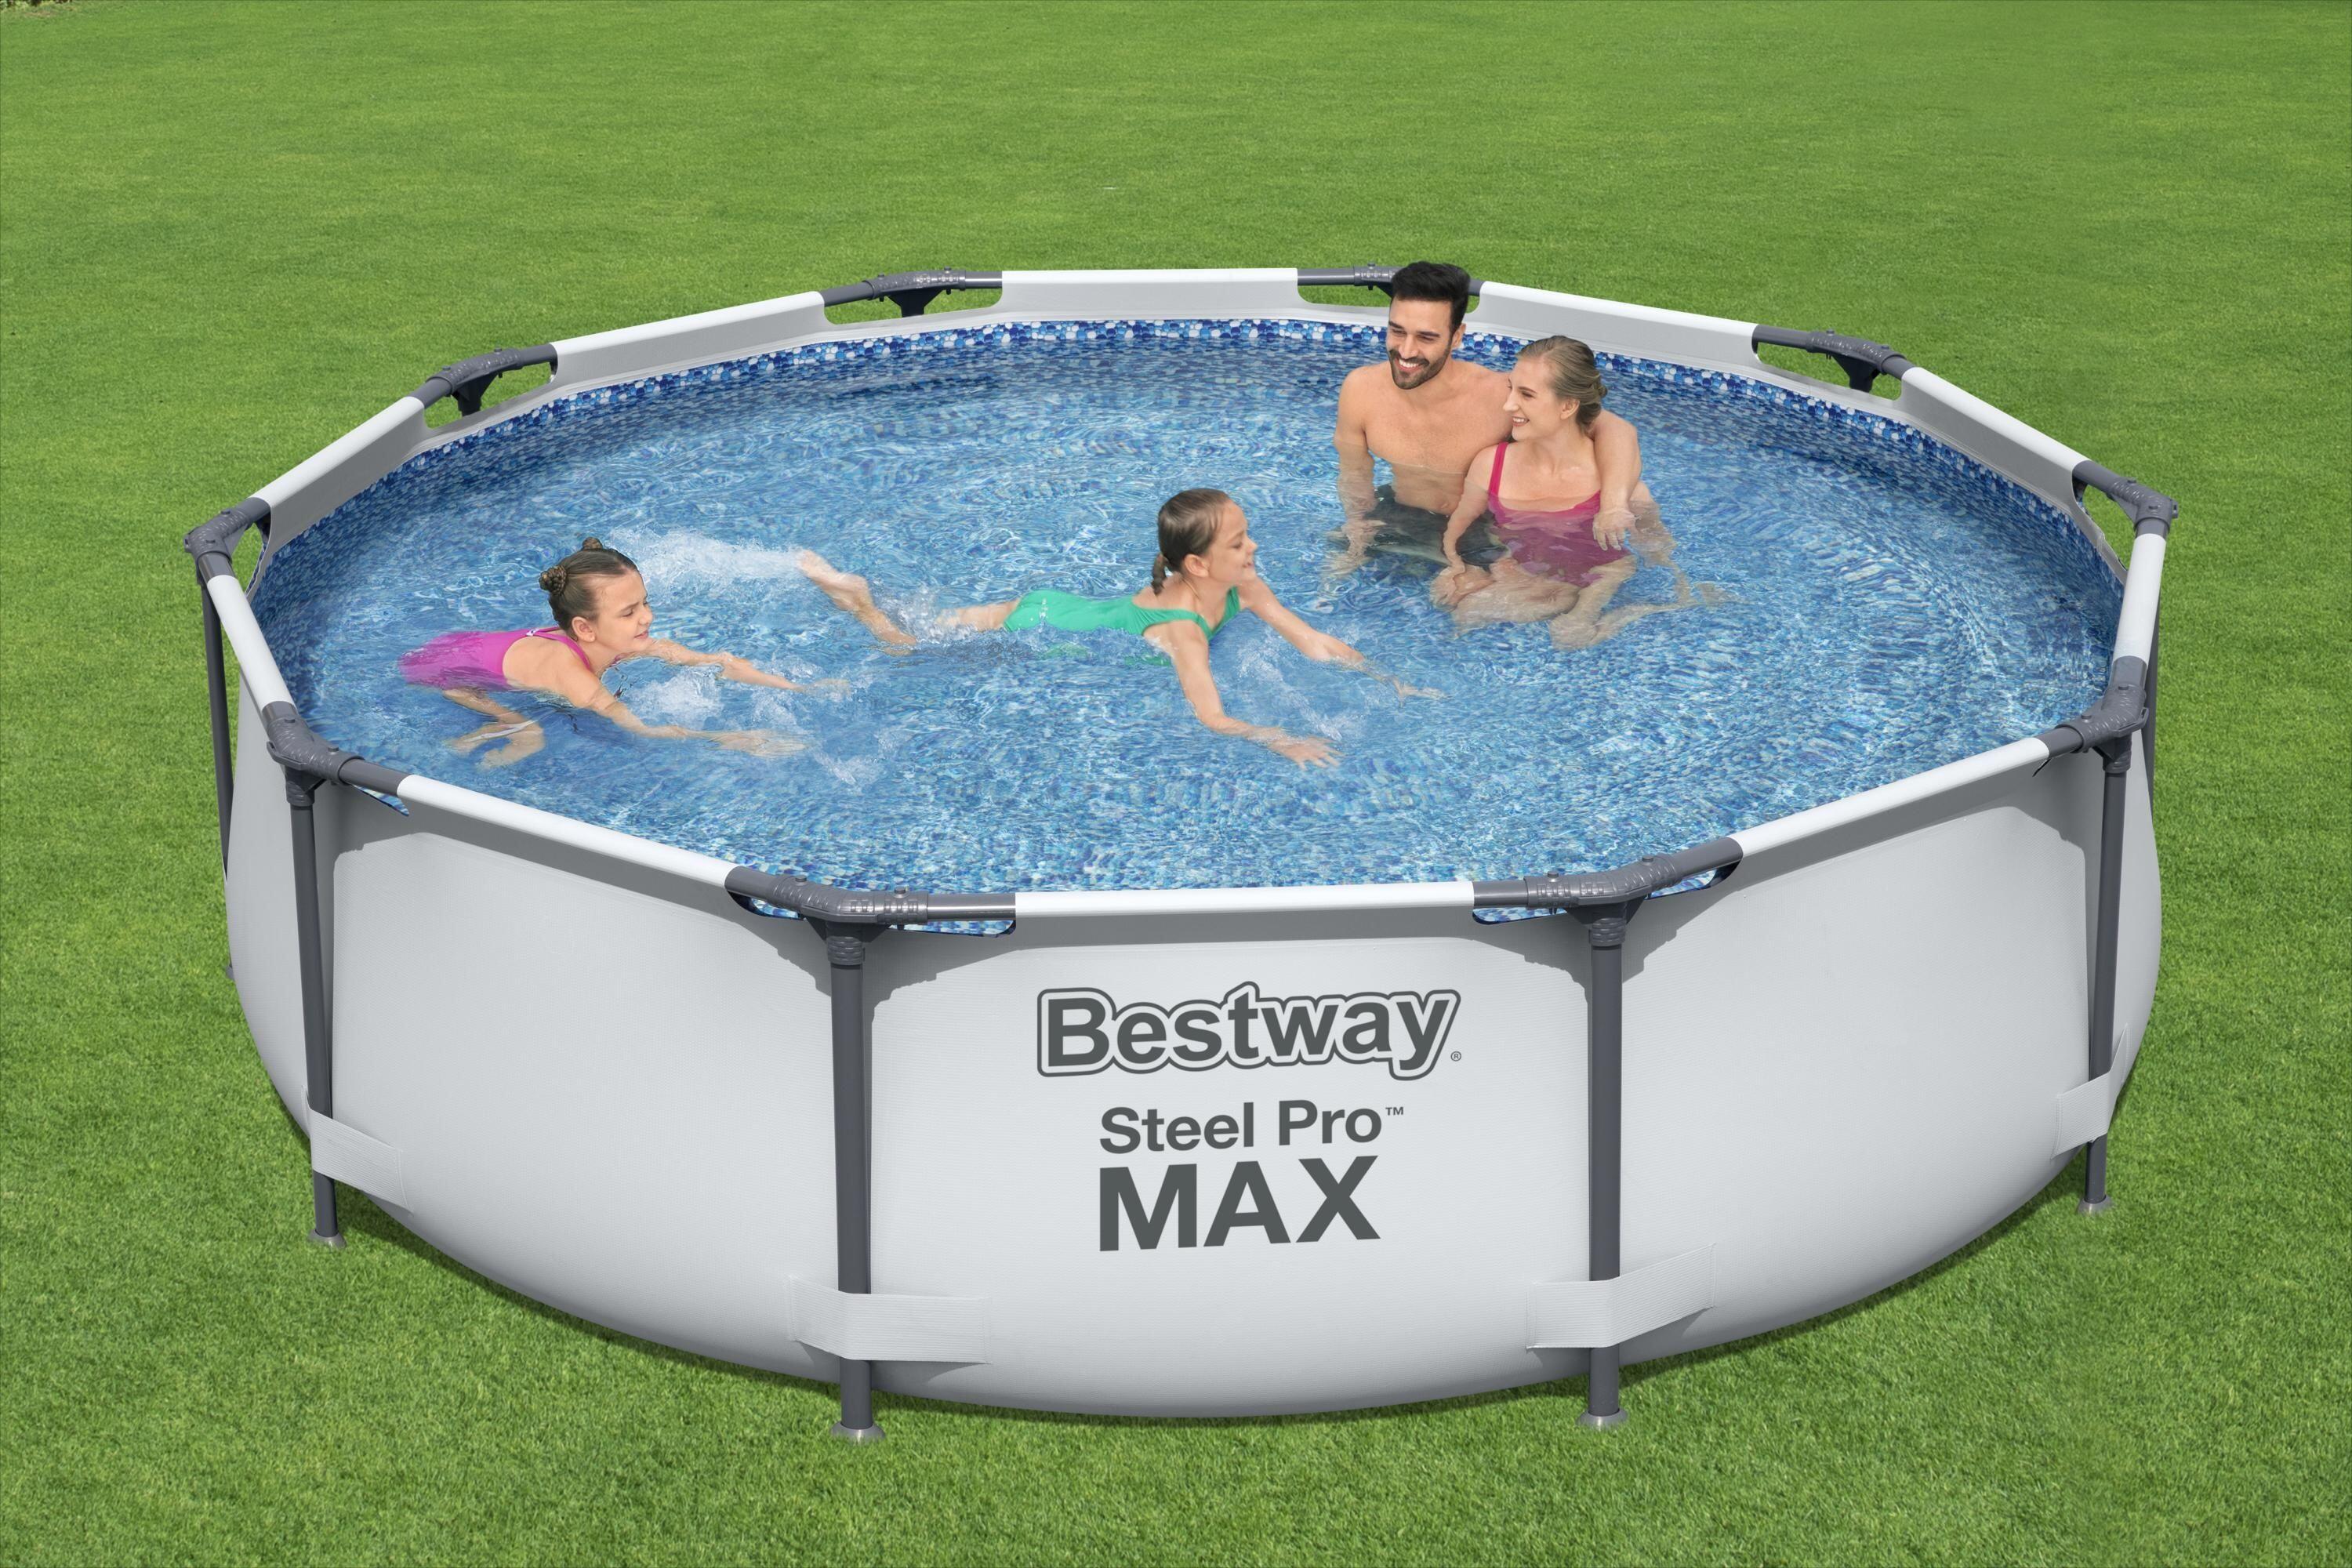 Bestway Steel Pro MAX Framed Above Ground Swimming Pool, 10ft x 30" - Grey 2/5